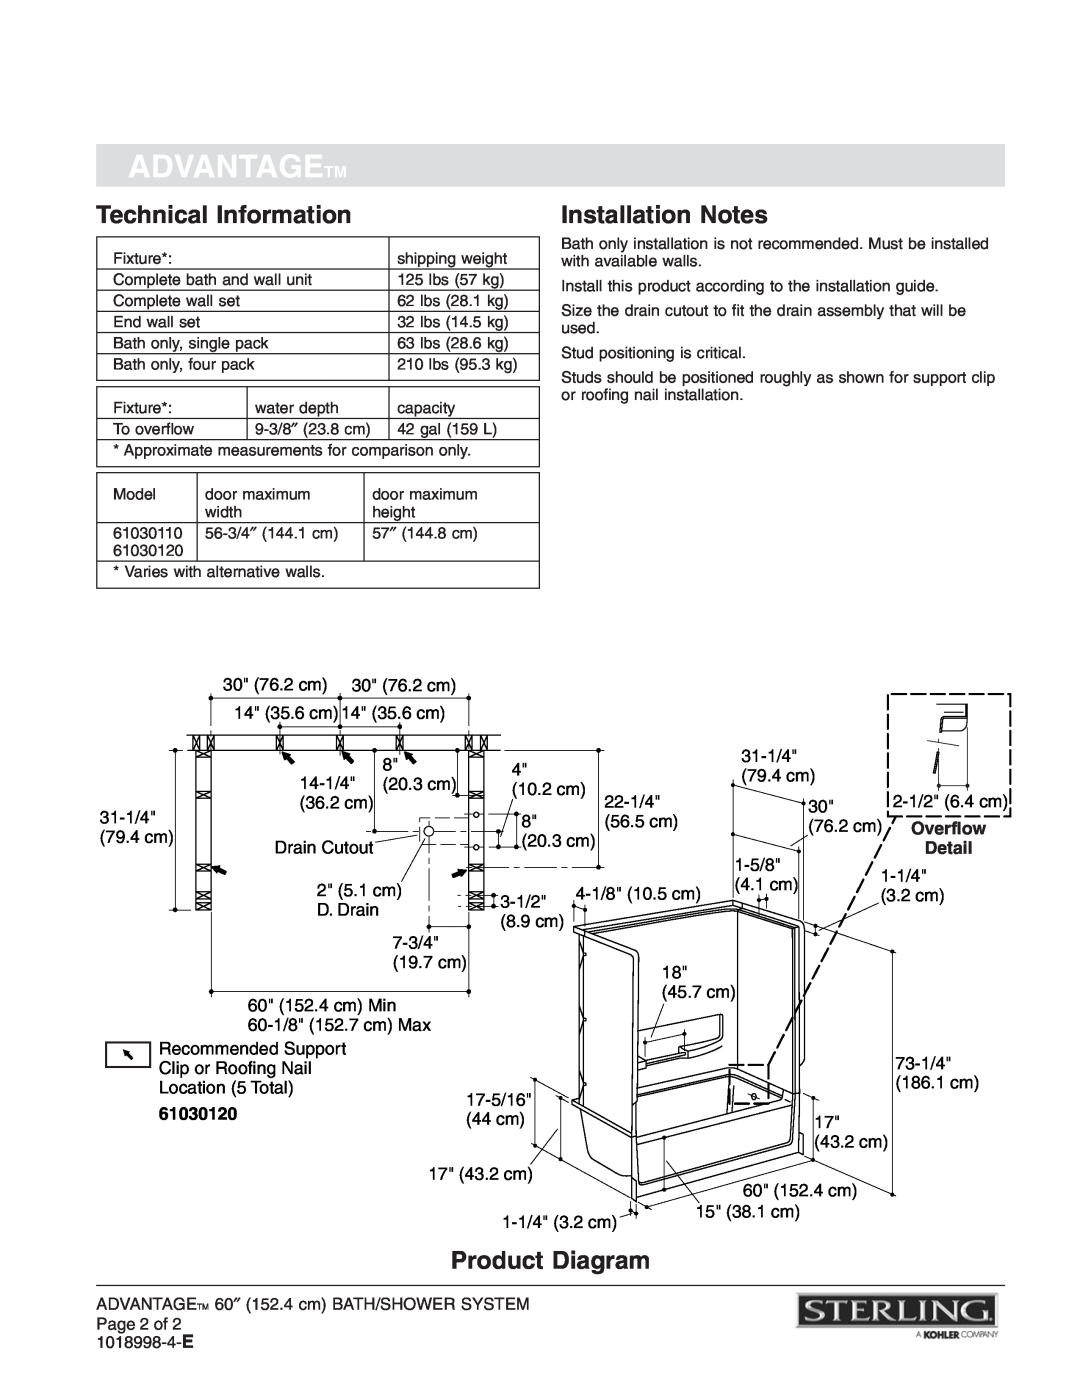 Sterling Plumbing 61030110 Technical Information, Installation Notes, 1018998-4-E, Advantagetm, Overflow, Detail, 61030120 